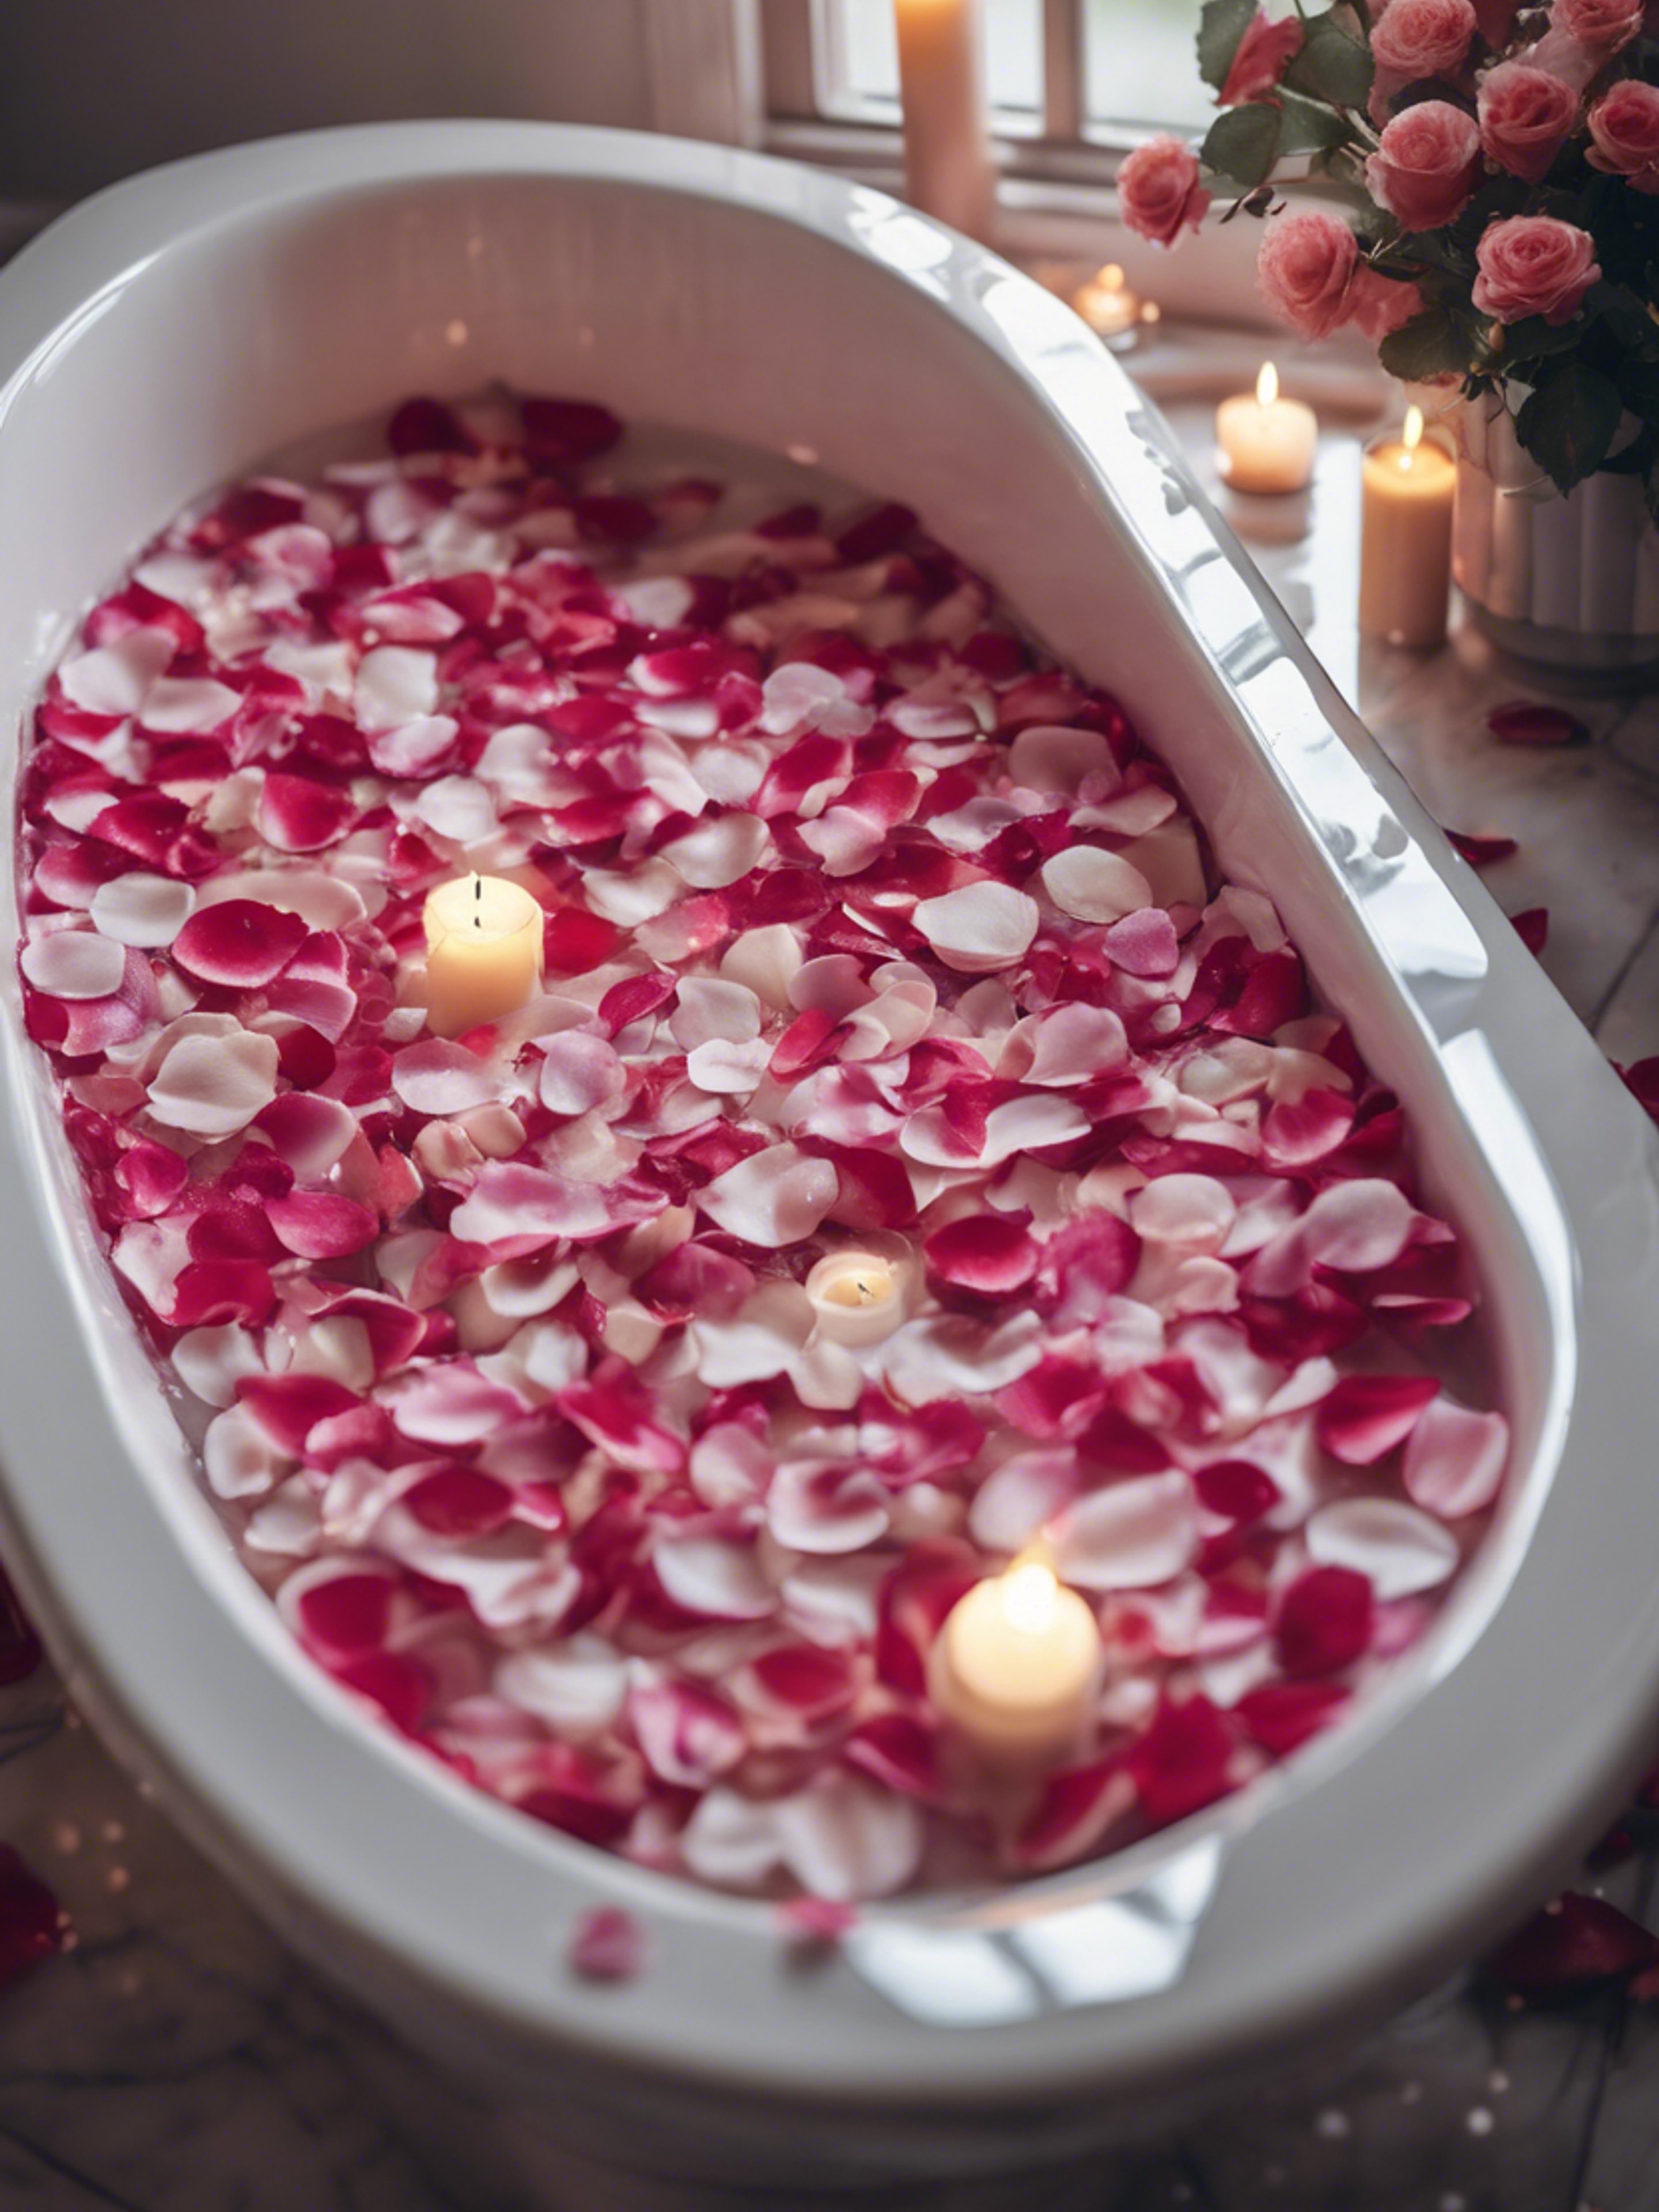 An inviting bubble bath in a white tub with rose petals and candles around the edge of the tub. Behang[29454076f2ac4acb9df8]